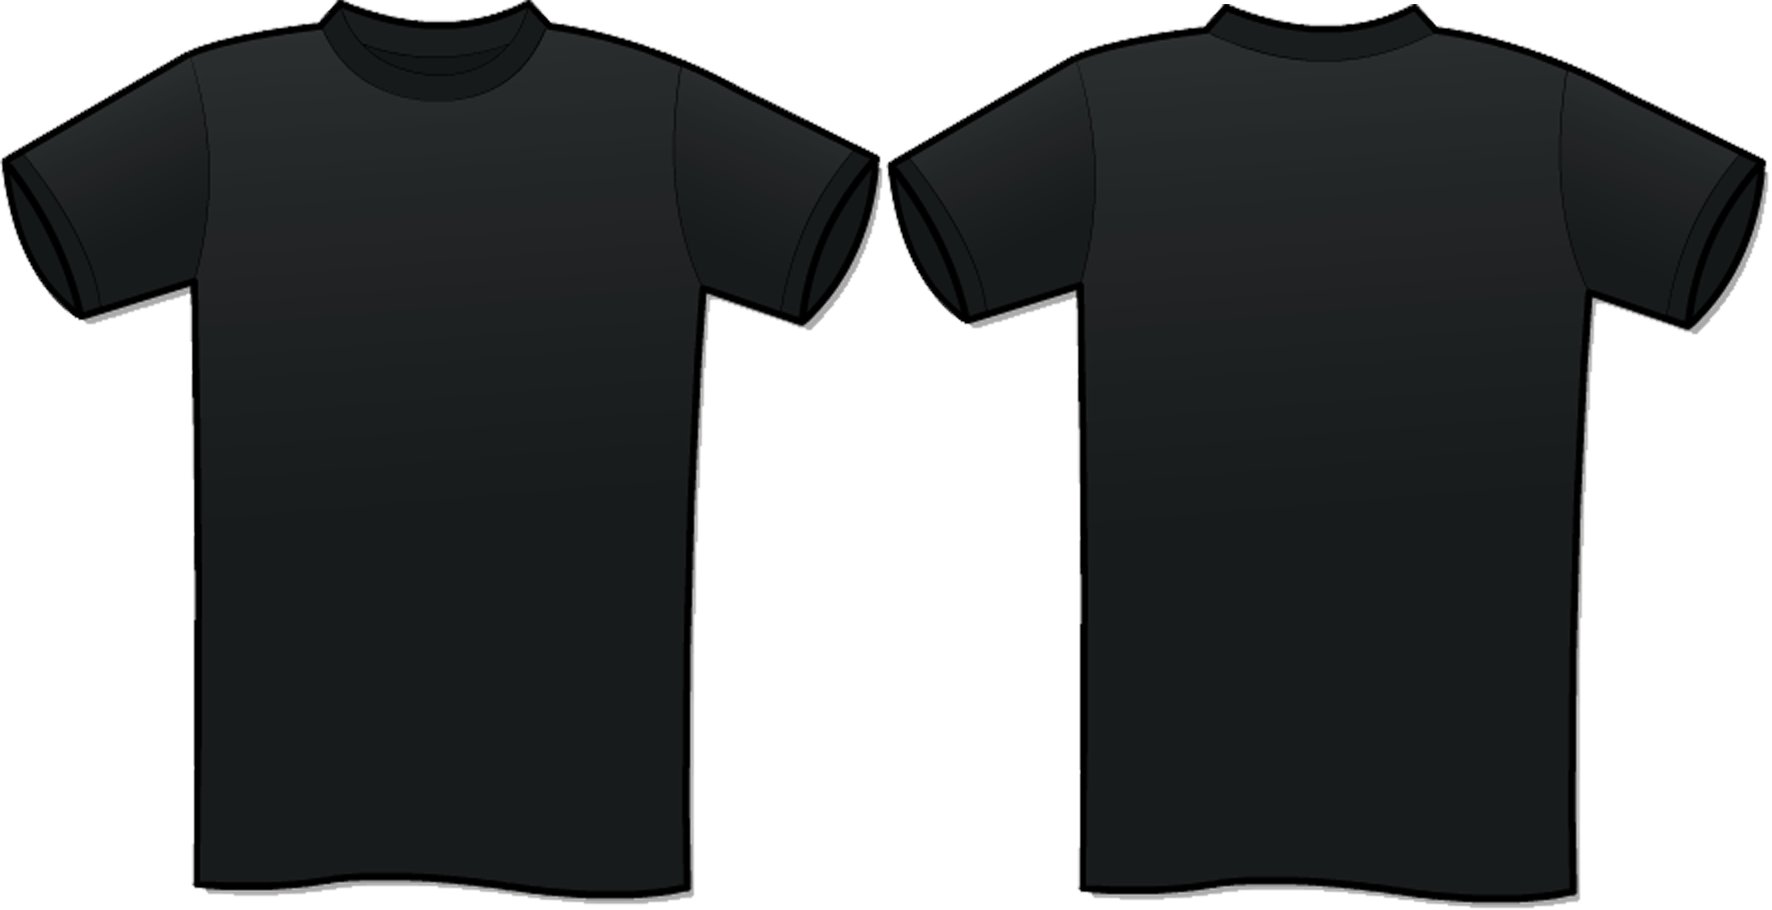 Free Tshirt Template, Download Free Tshirt Template png images, Free